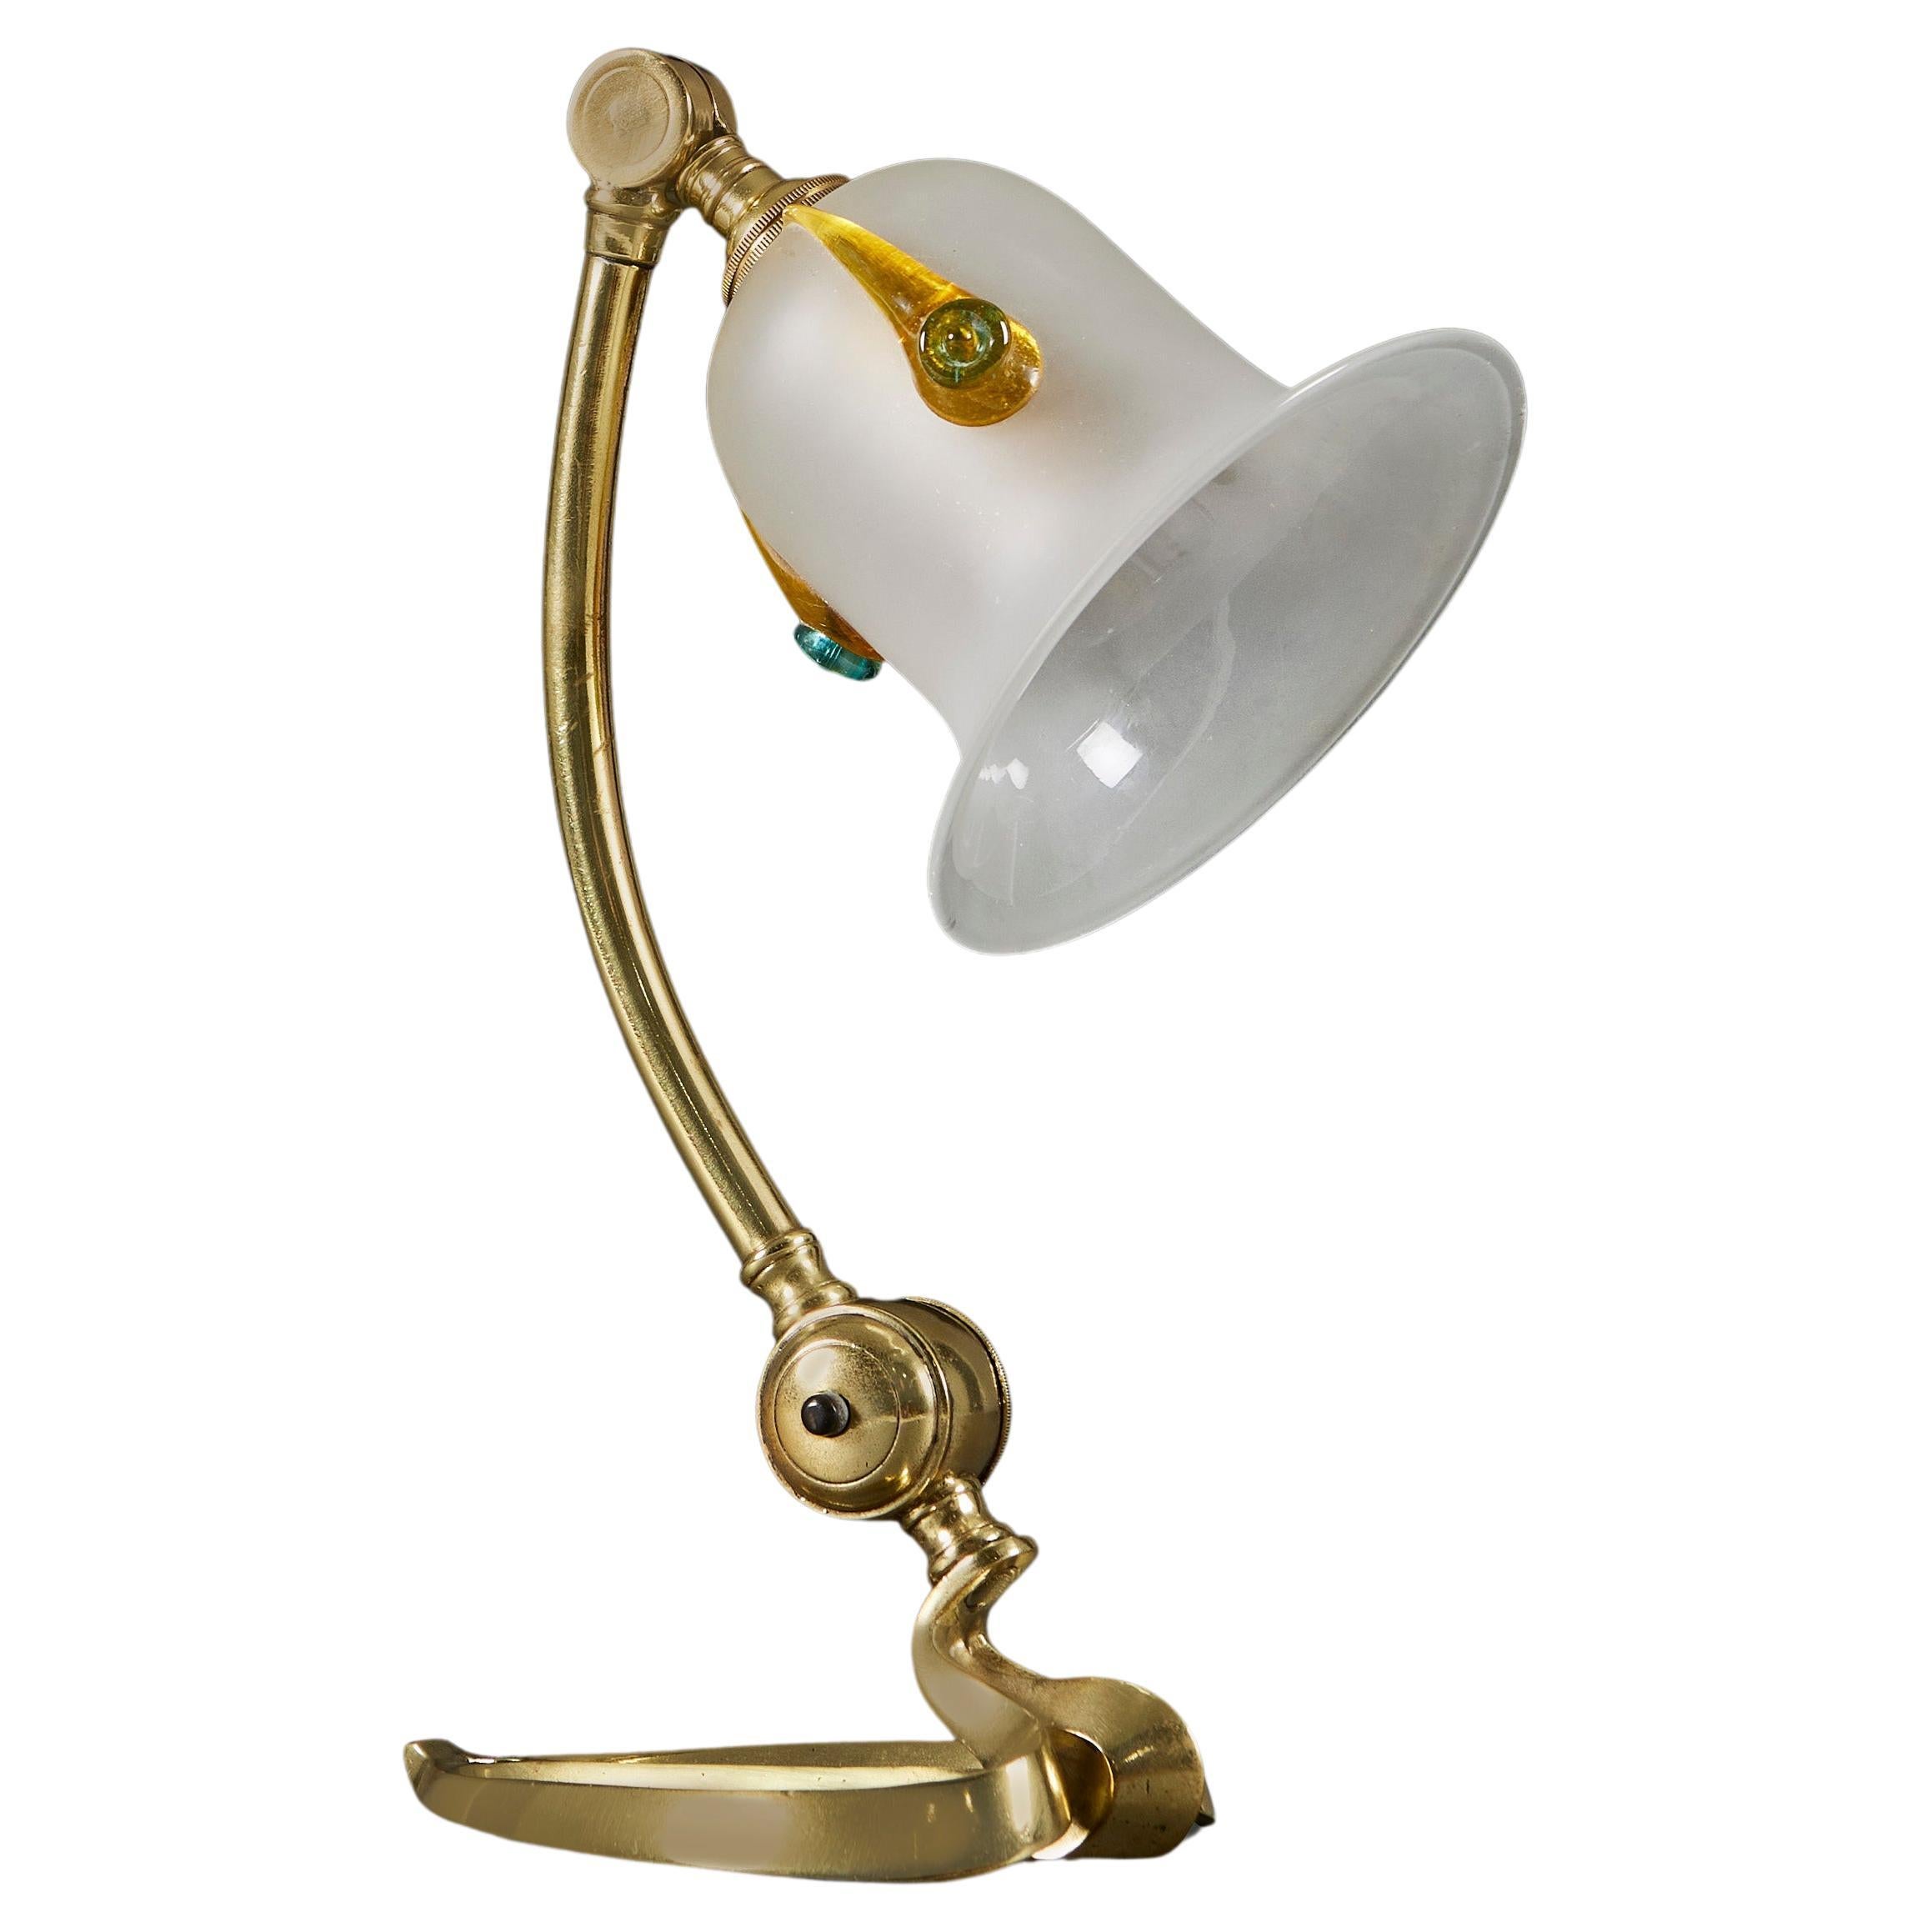 A Benson Brass Desk Lamp With A Murano Glass Shade For Sale